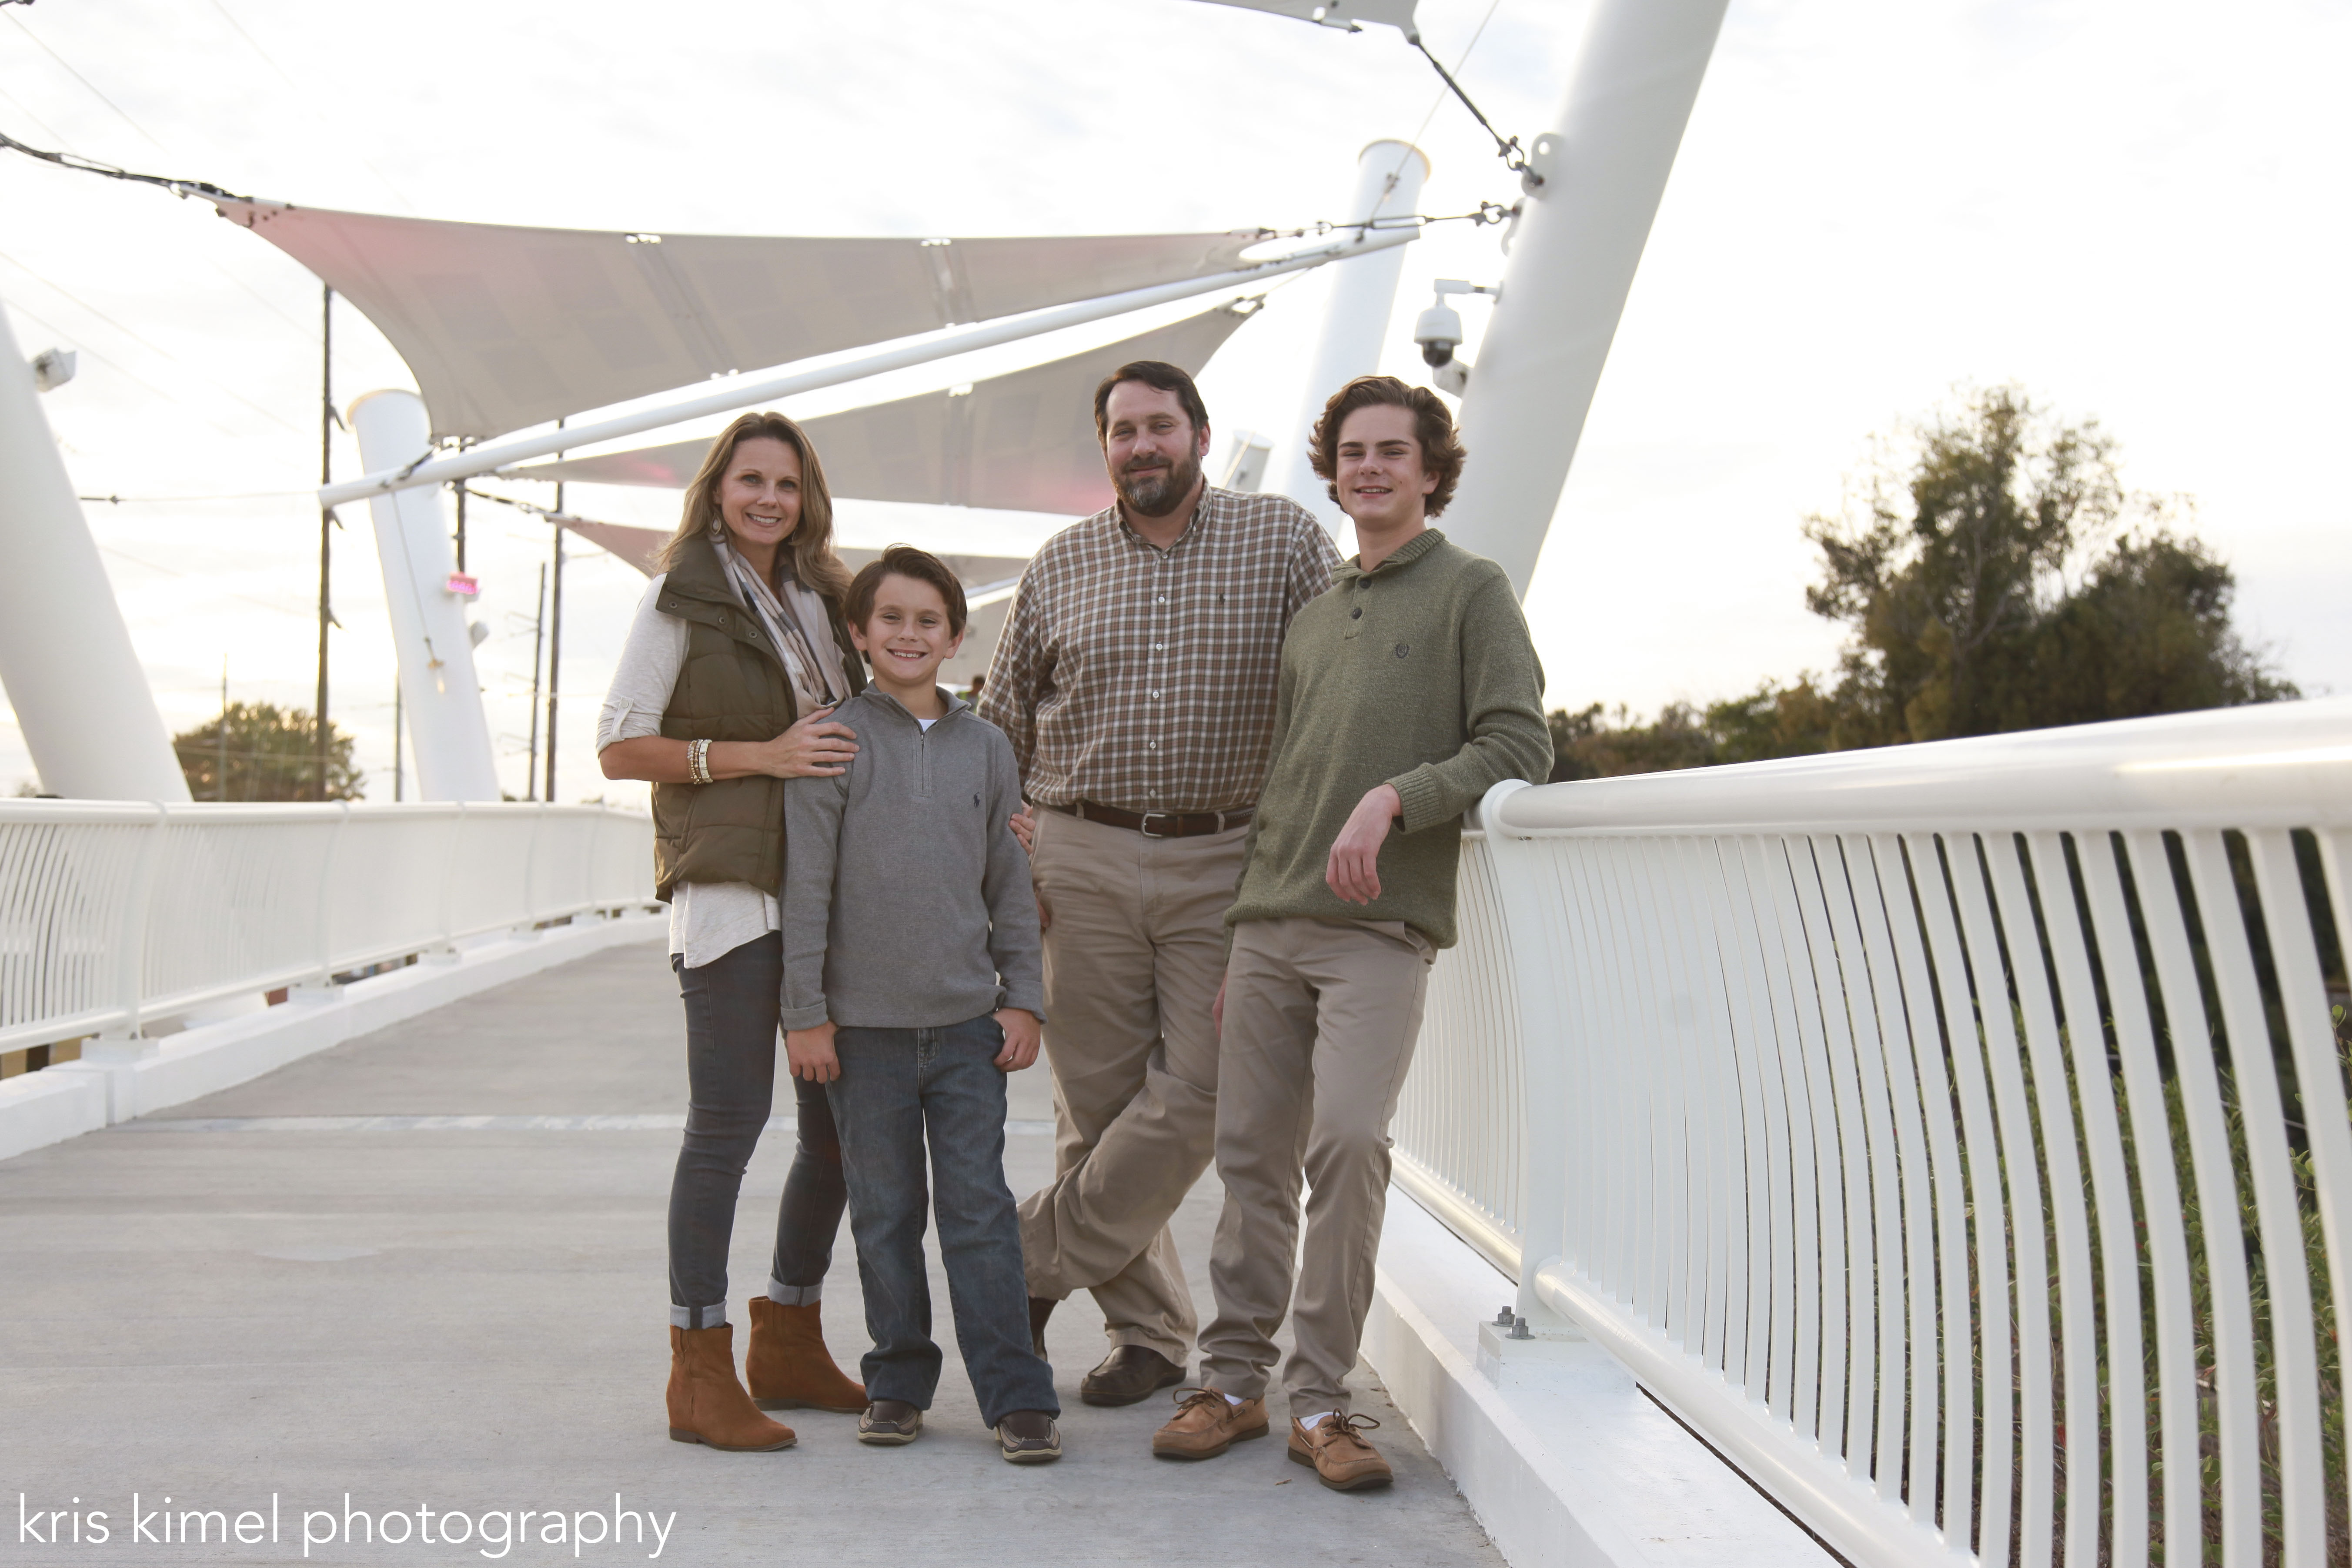 Kris Kimel Photography Holiday Portrait Special, Tallahassee Holiday Portraits